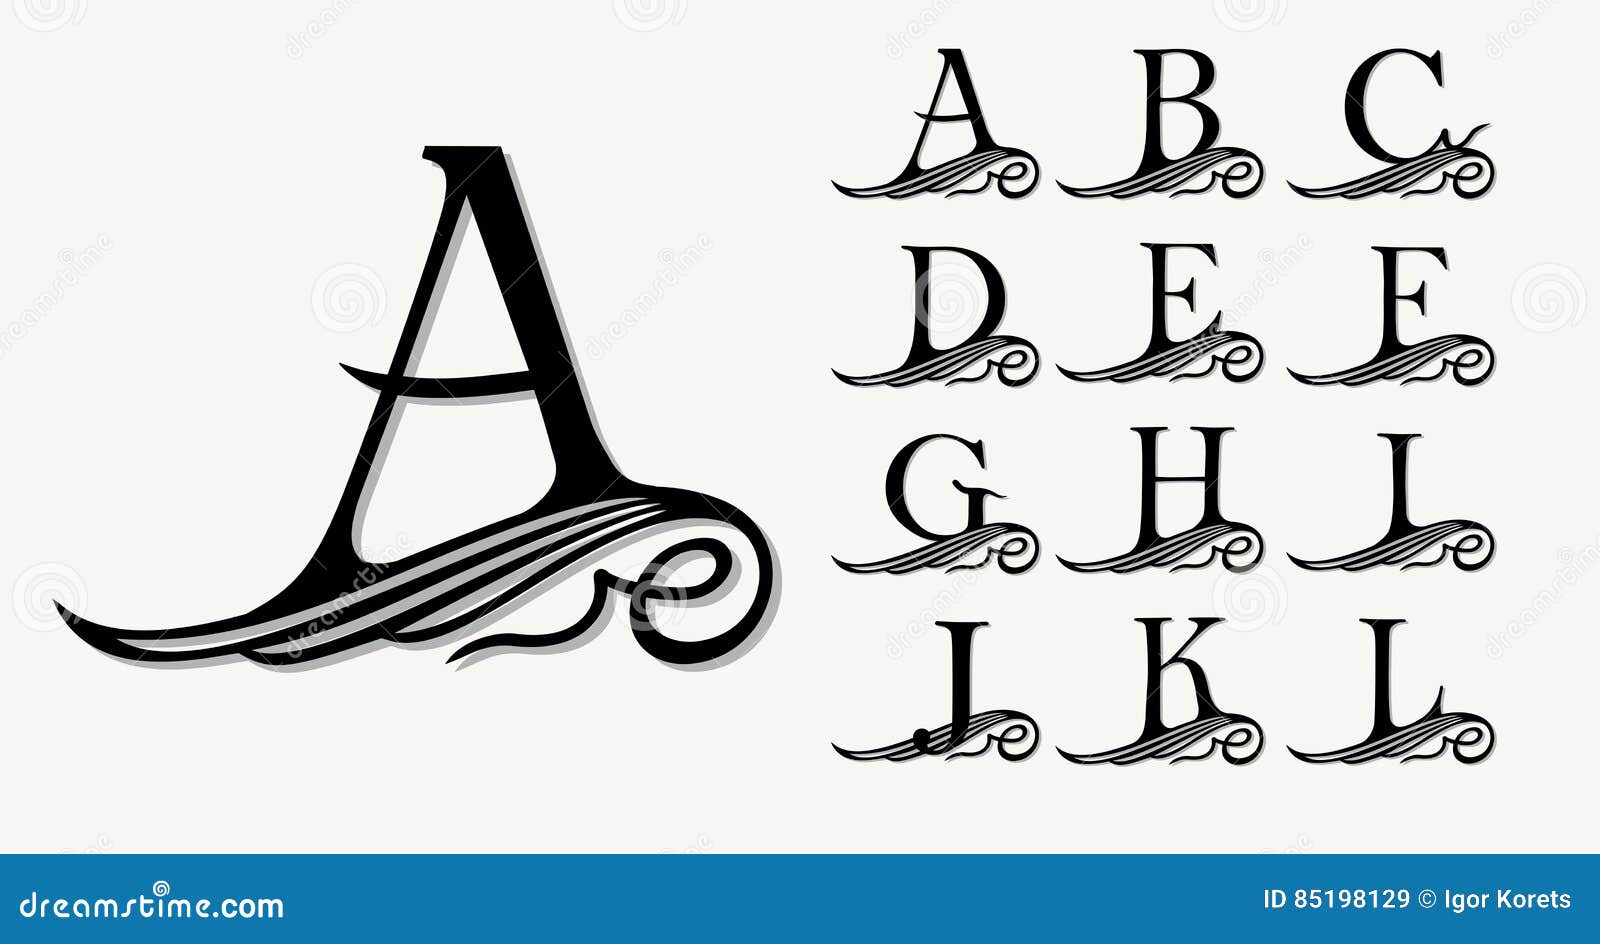 vintage set 1. calligraphic capital letters with curls for monograms, emblems and logos.